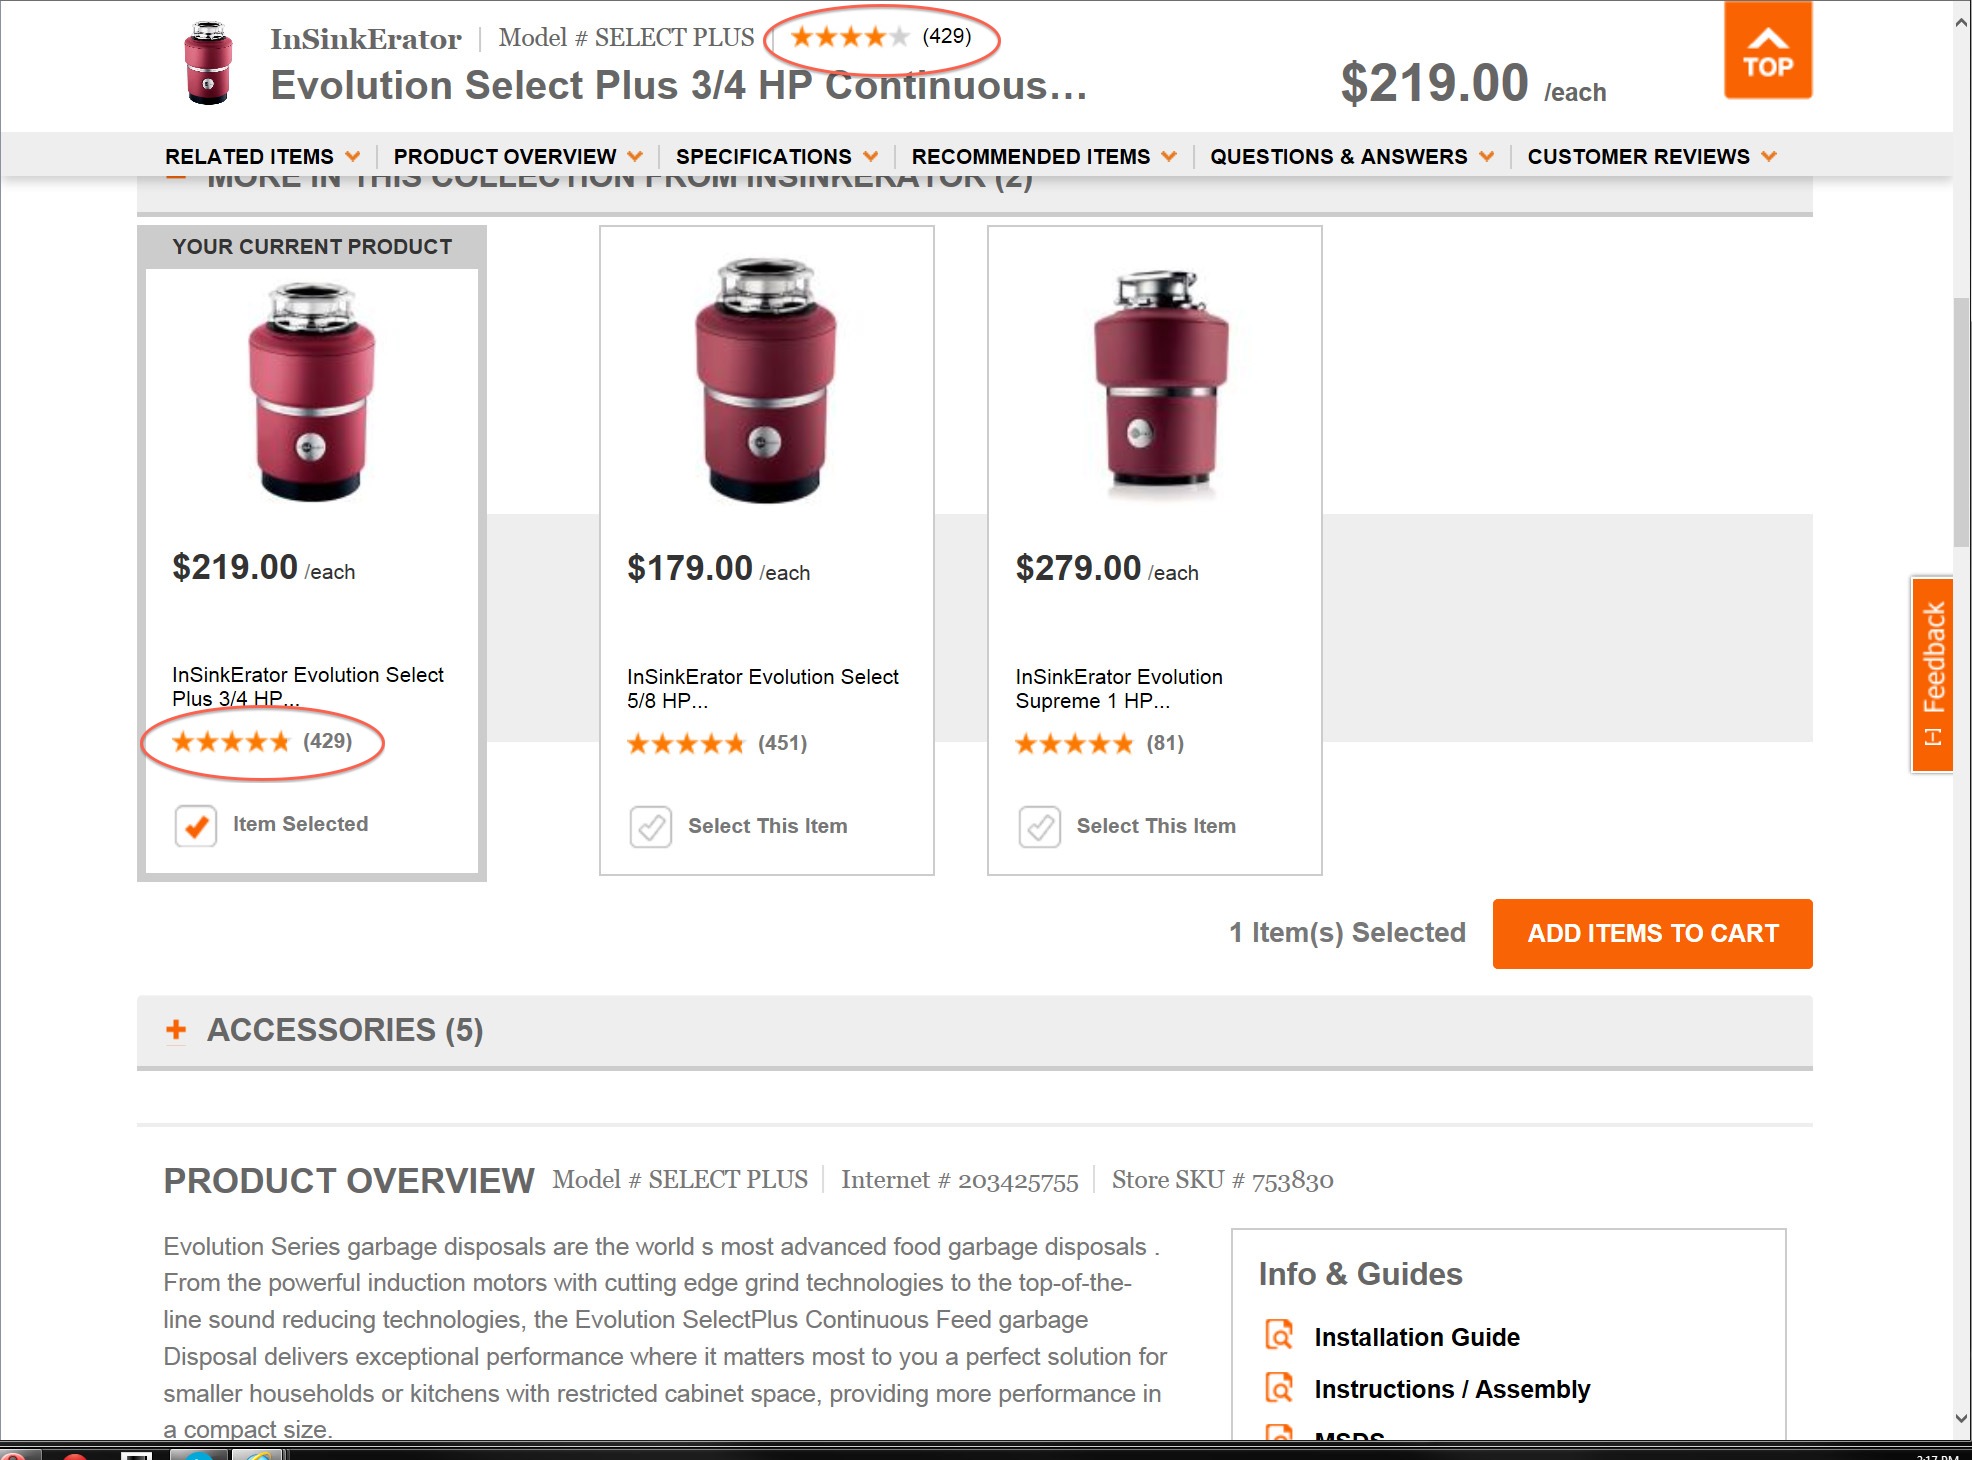 Home Depot Website Glitch Provides Two Ratings For Some Products